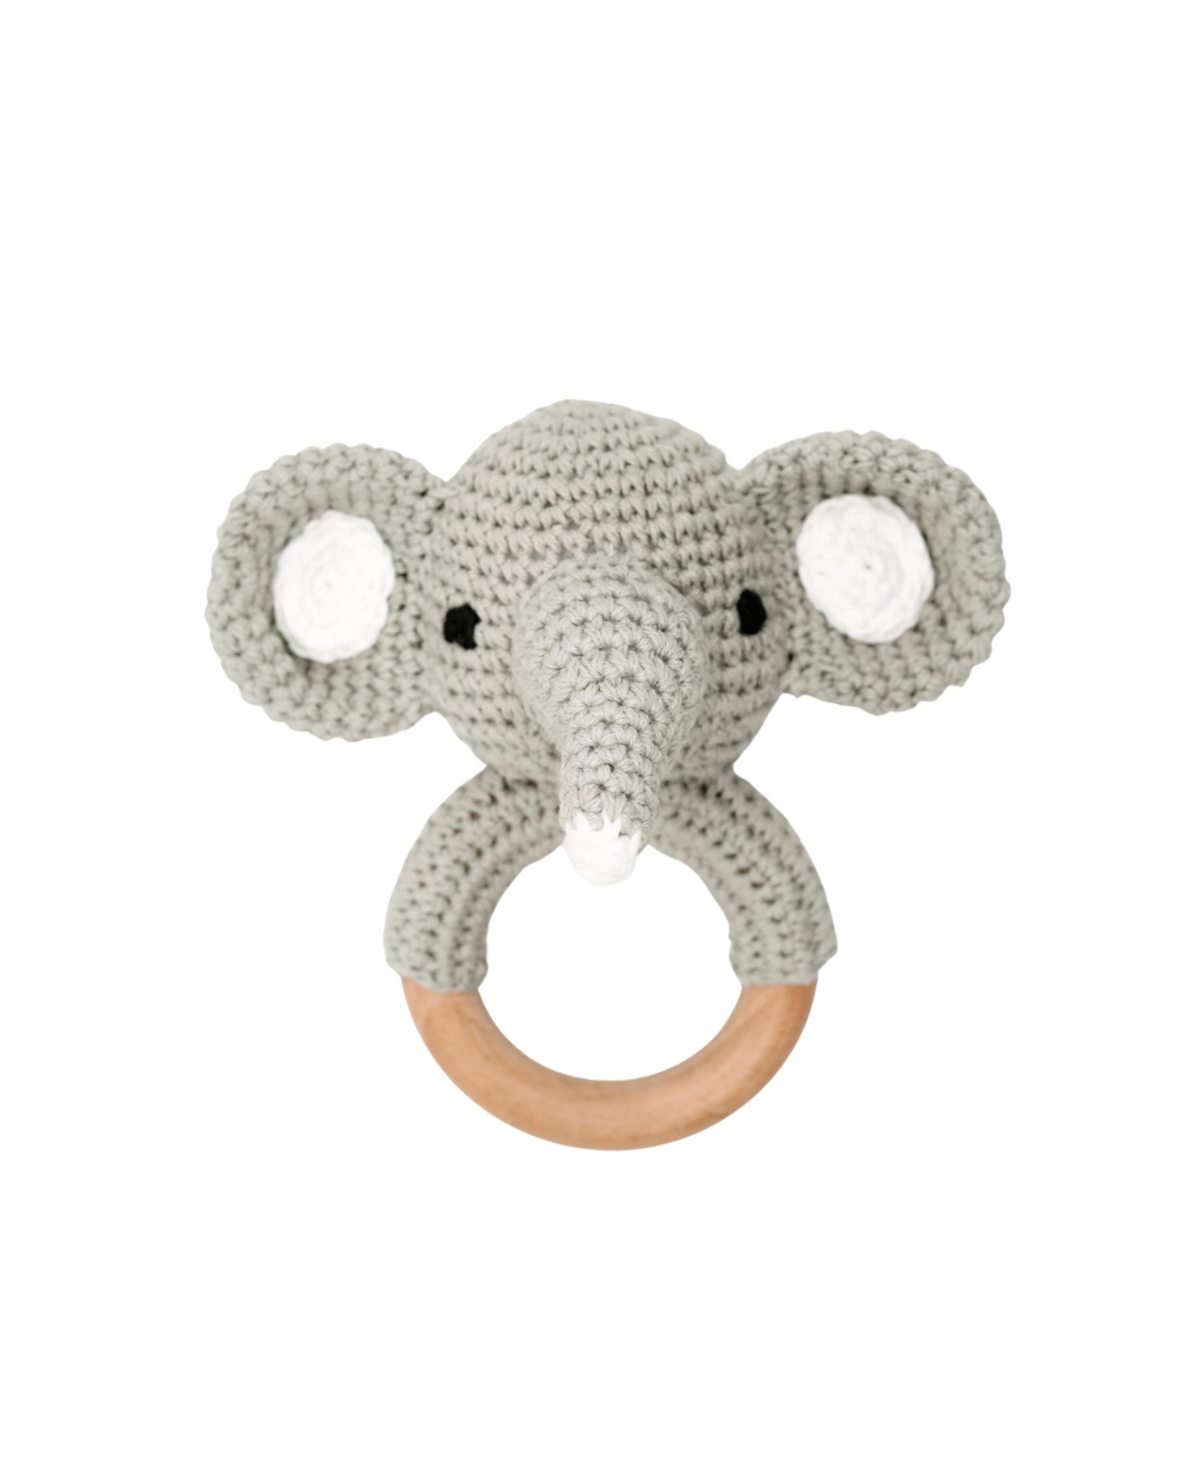 Embe Babies' Animal Wooden Rattle Elephant By